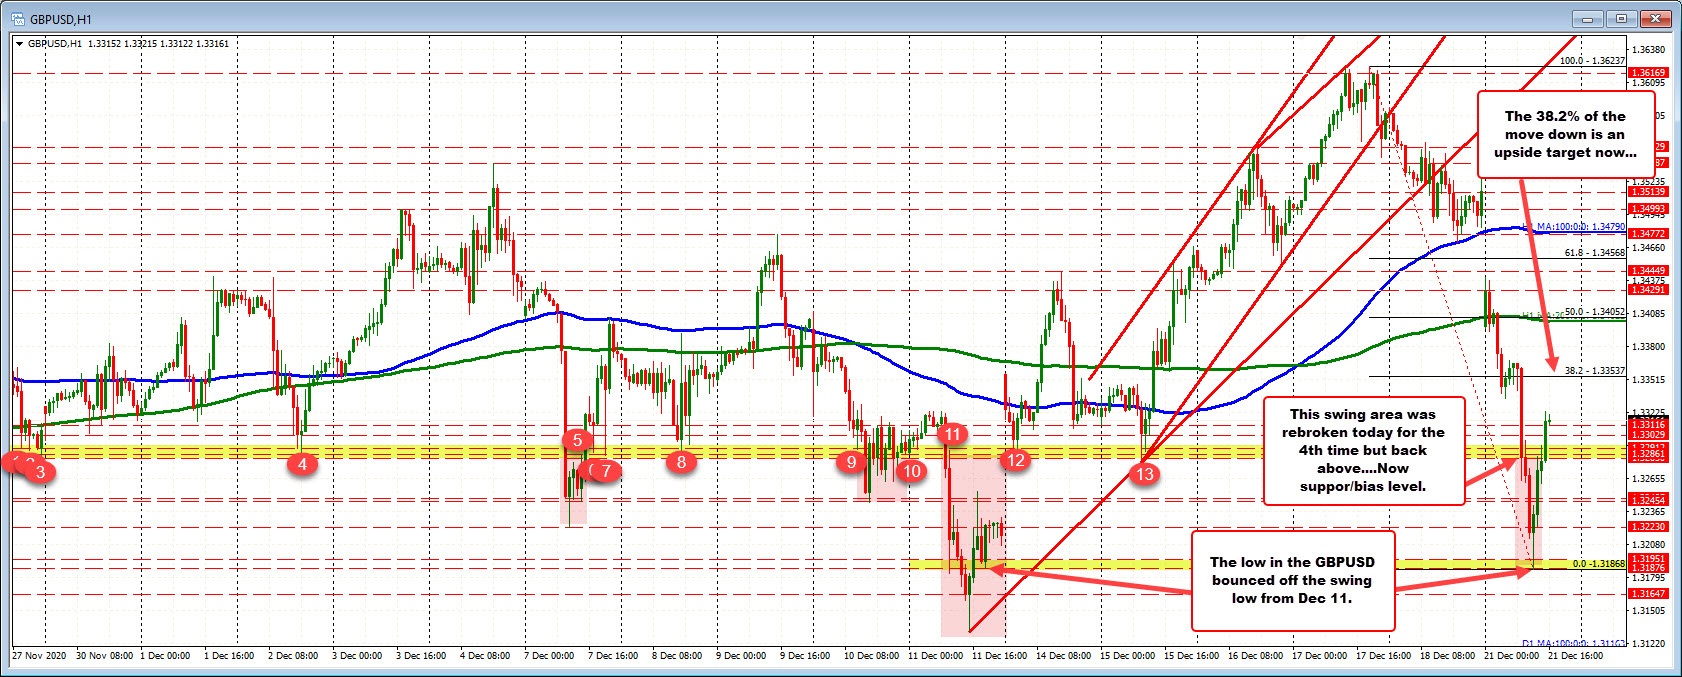 Swing area in the 1.3280-91 area